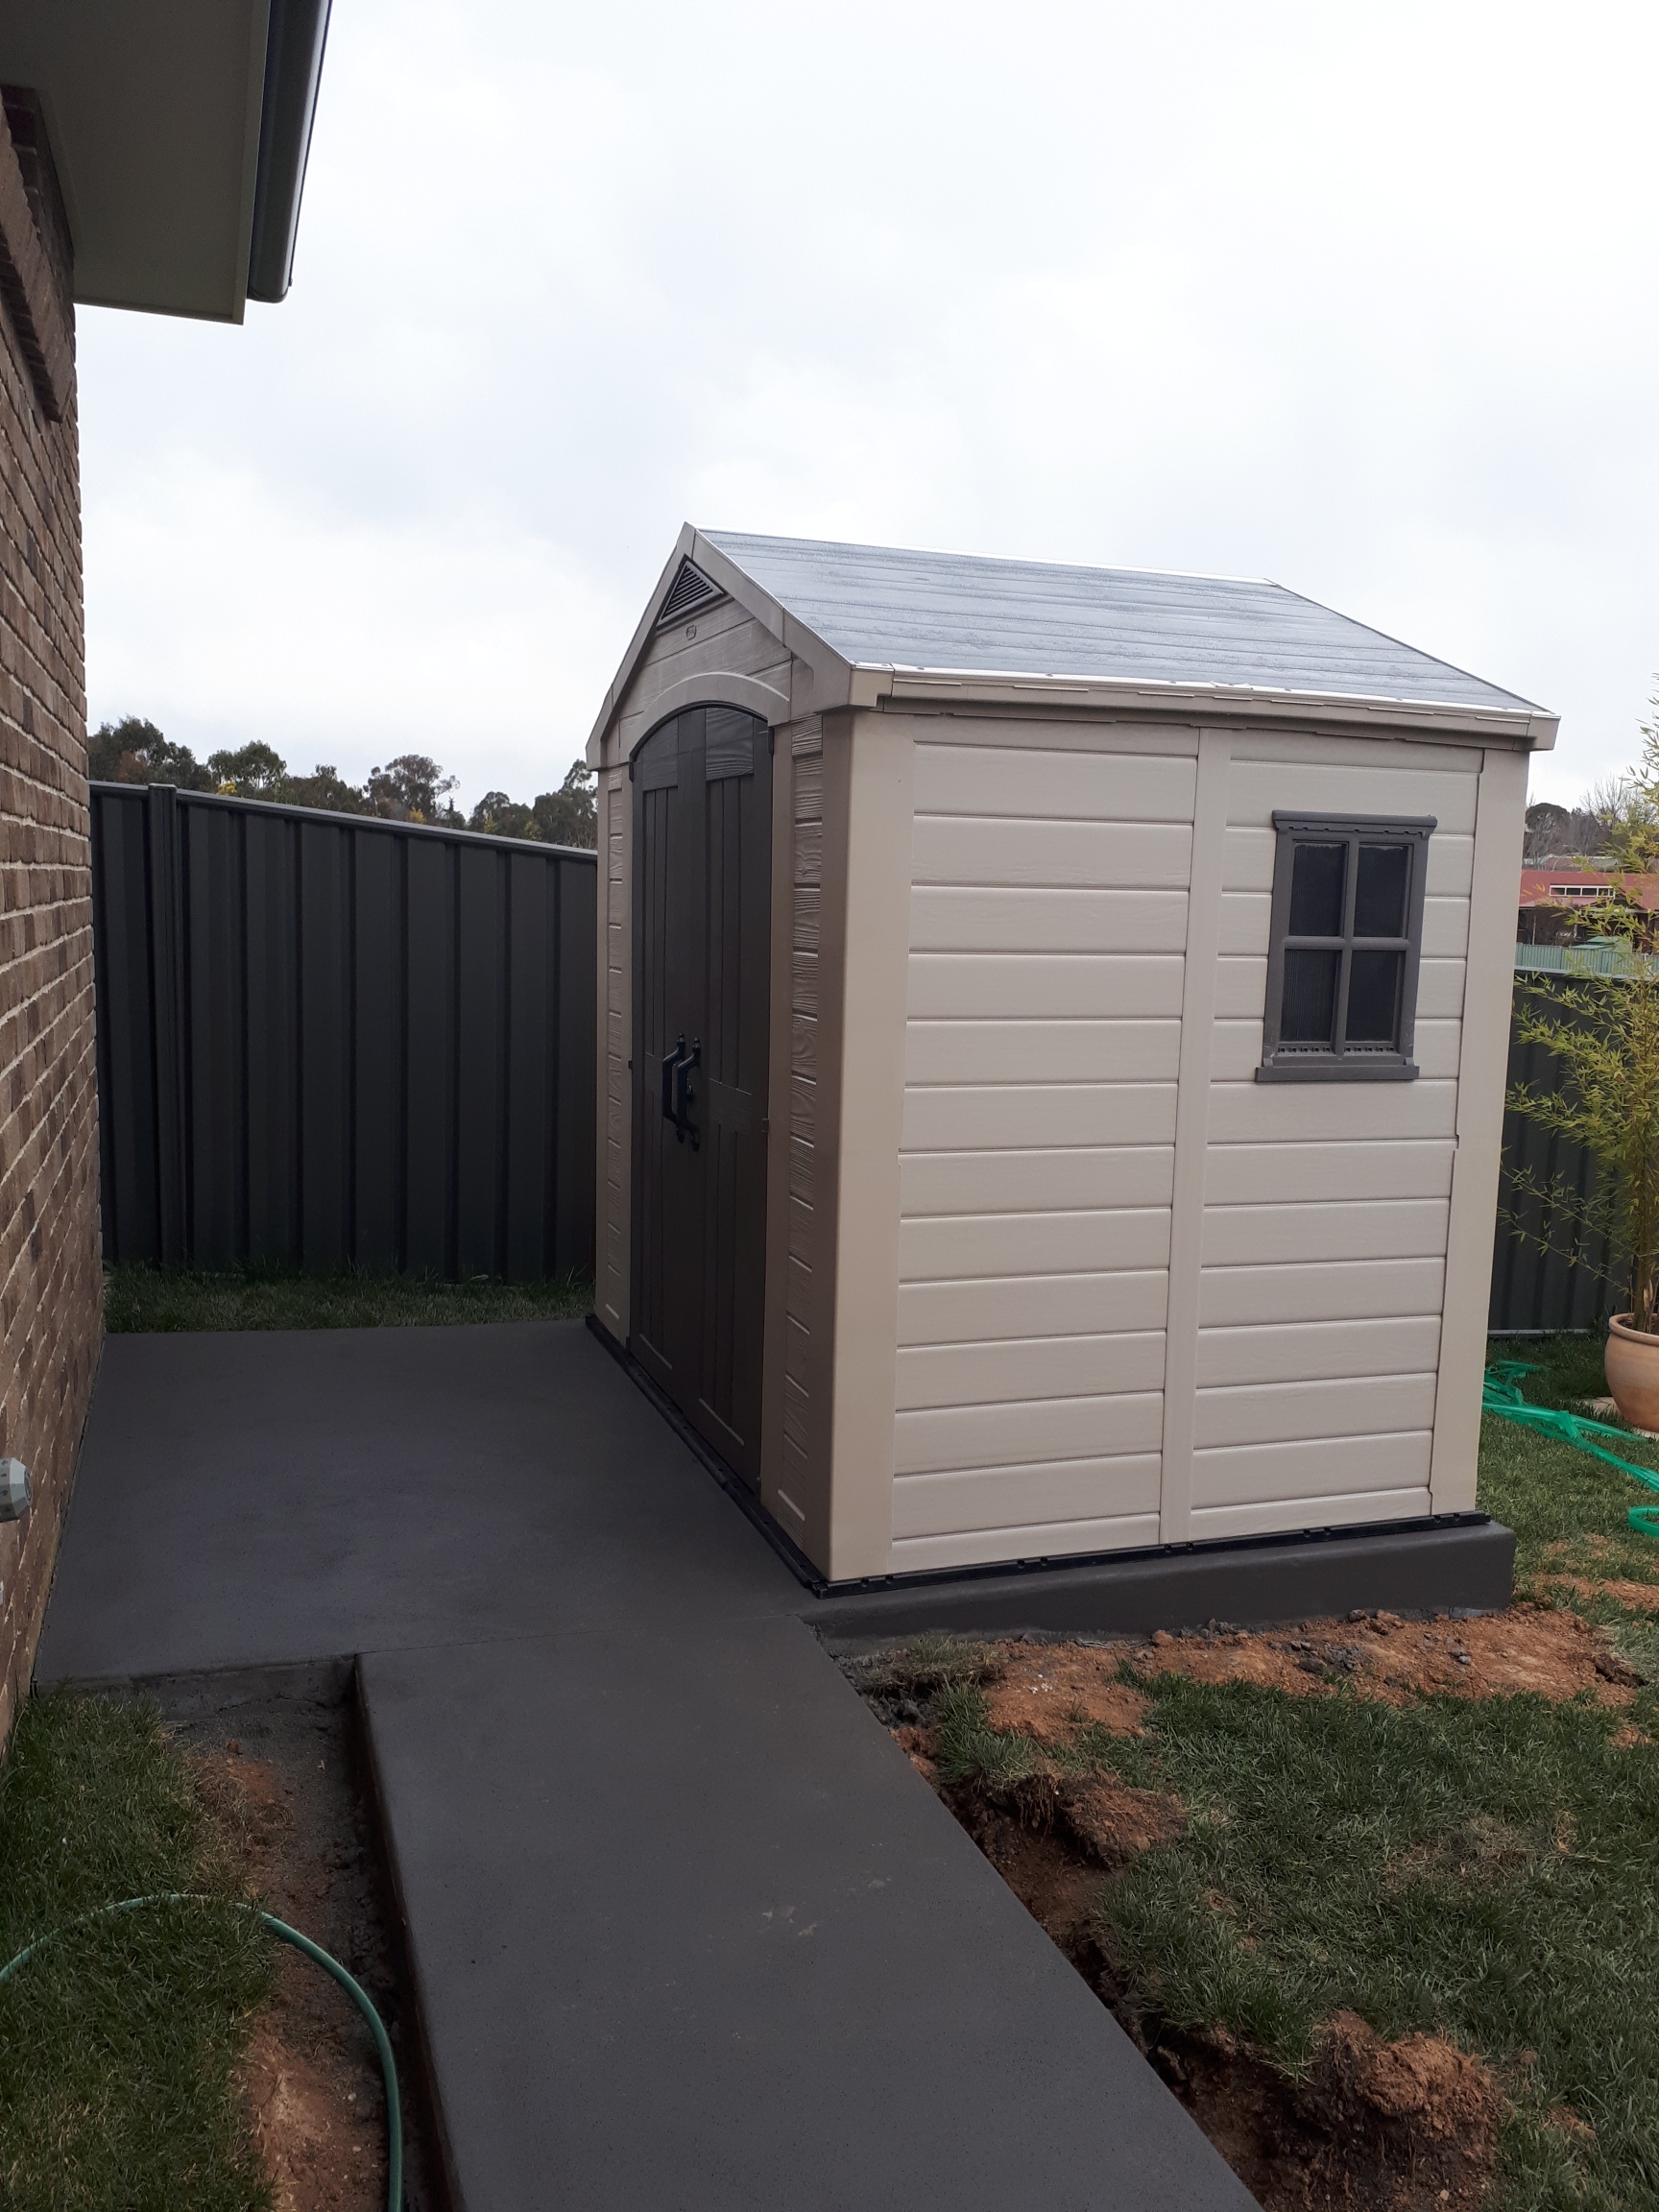 KETER FACTOR 8'x6' SHED 2.6mx1.8m